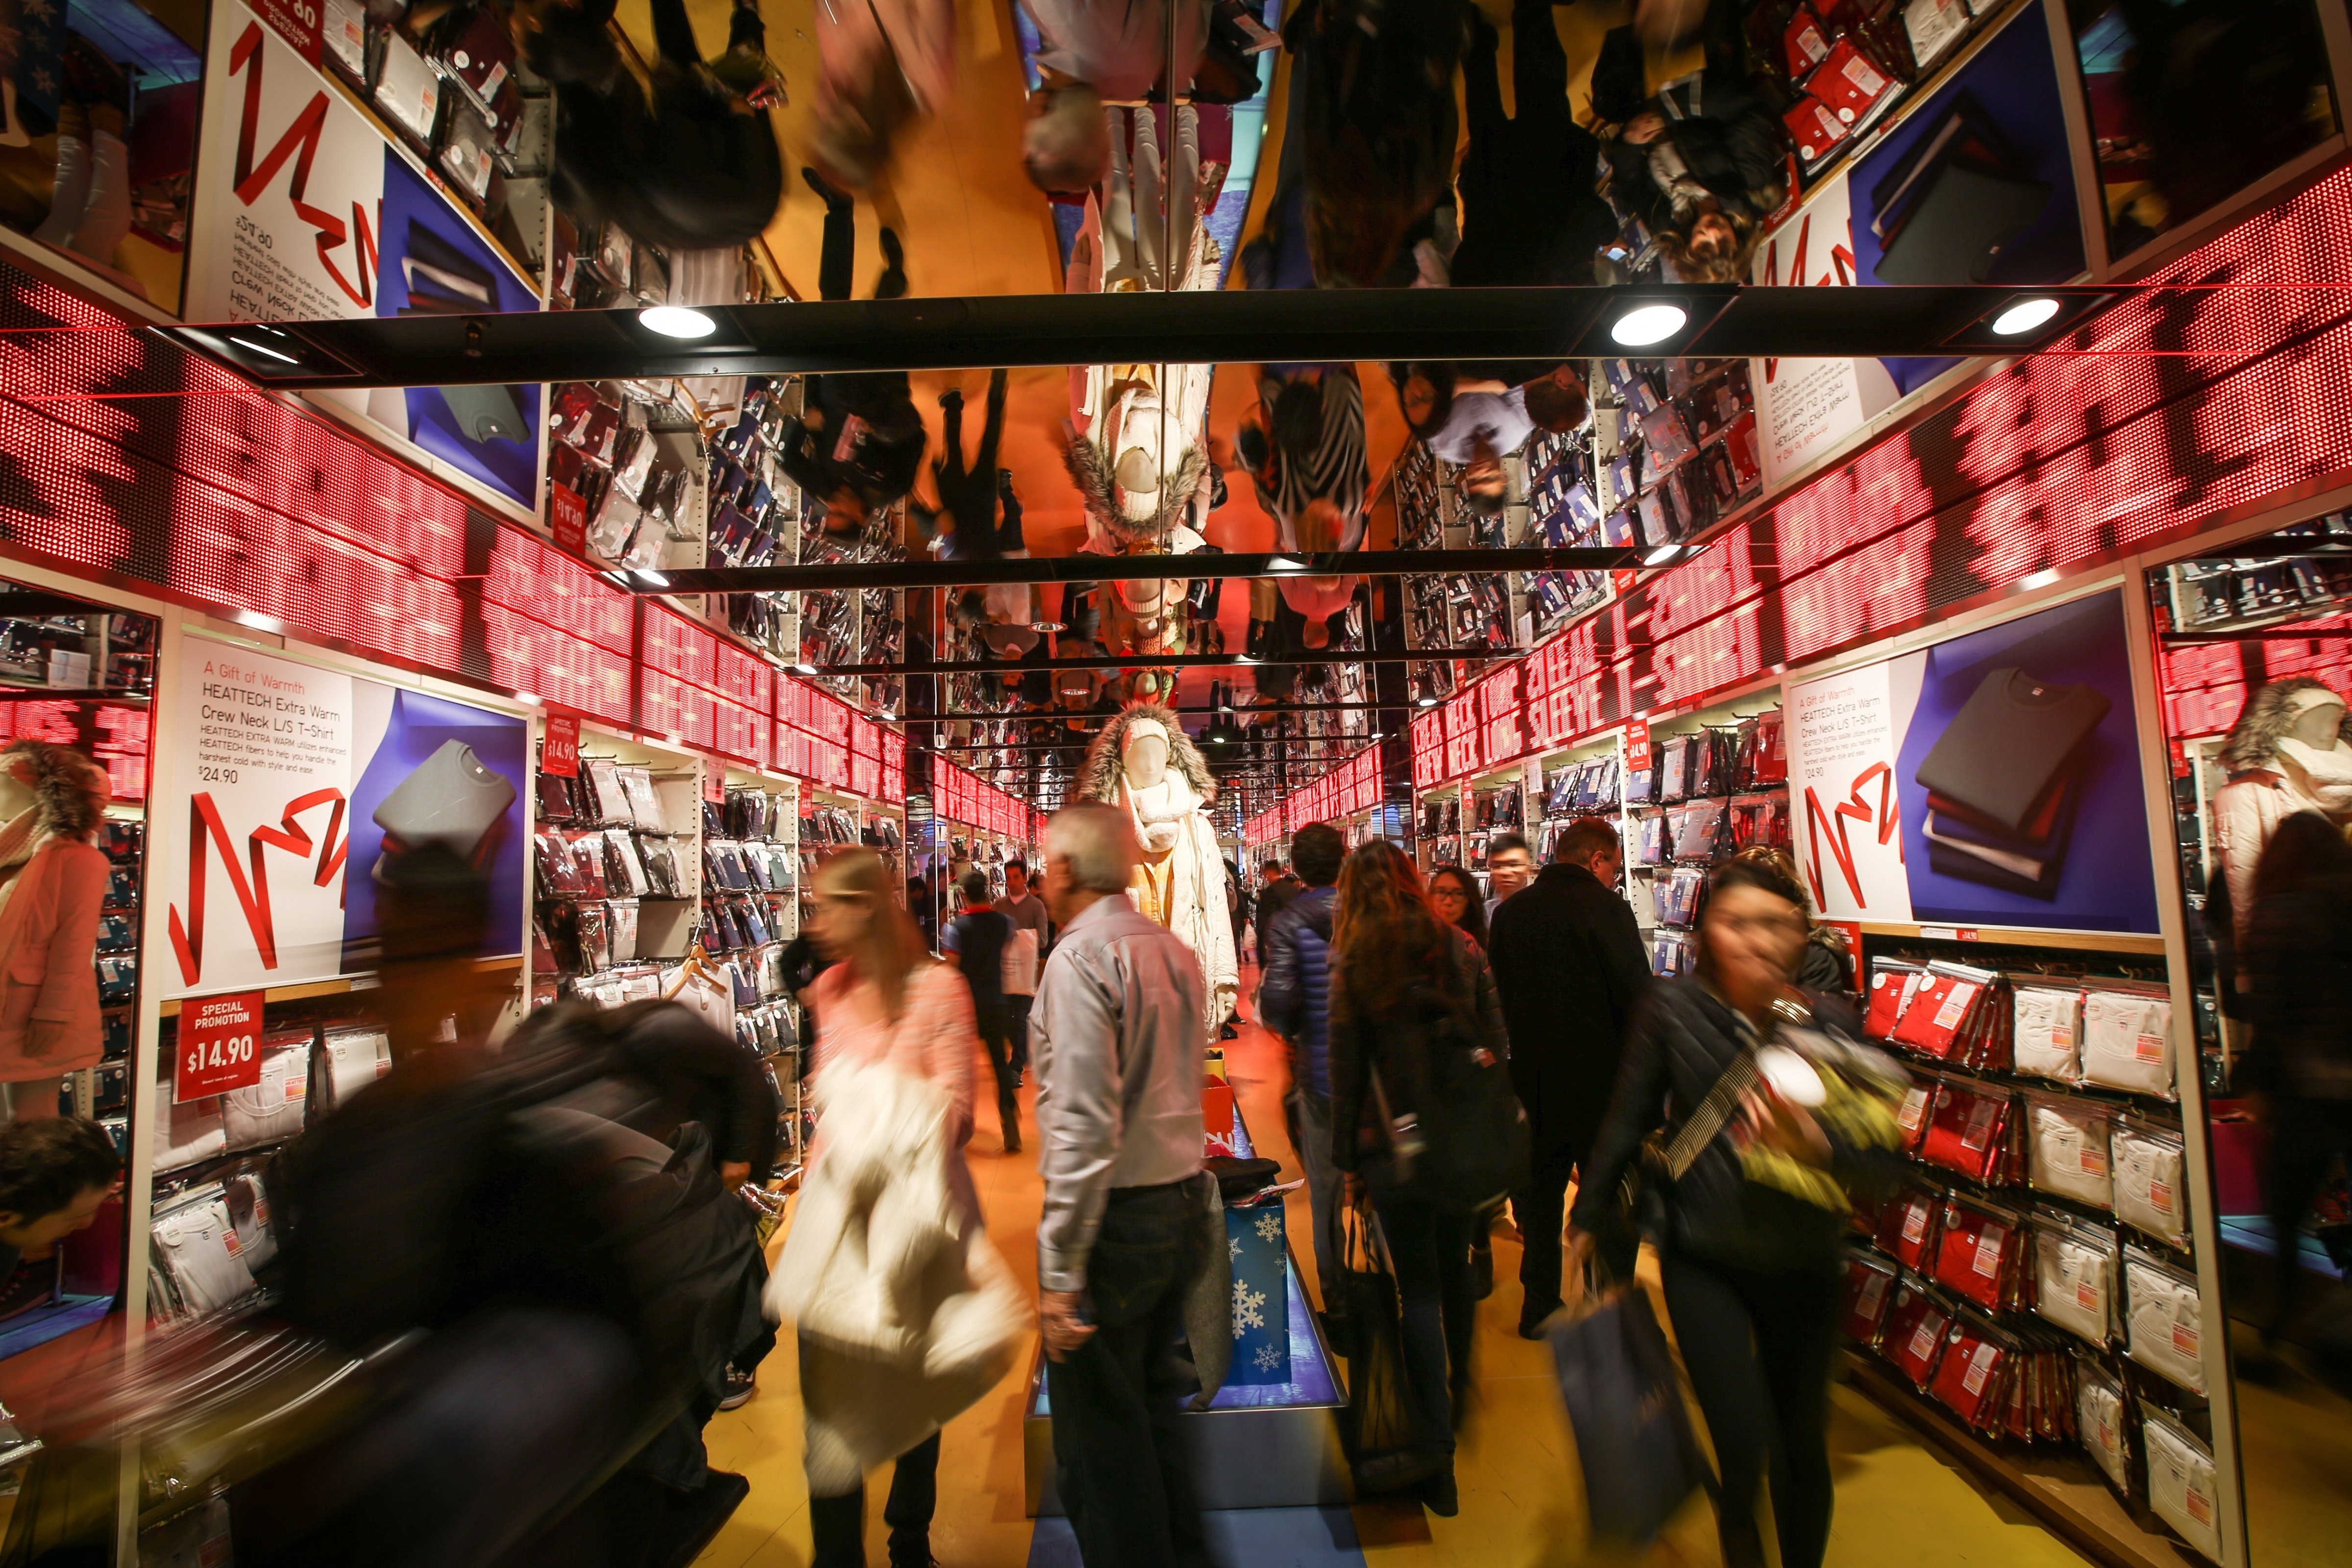 Shoppers are seen on the first day of Black Friday in New York City on Nov. 27, 2015. (Cem Ozdel—Anadolu Agency/Getty Images)